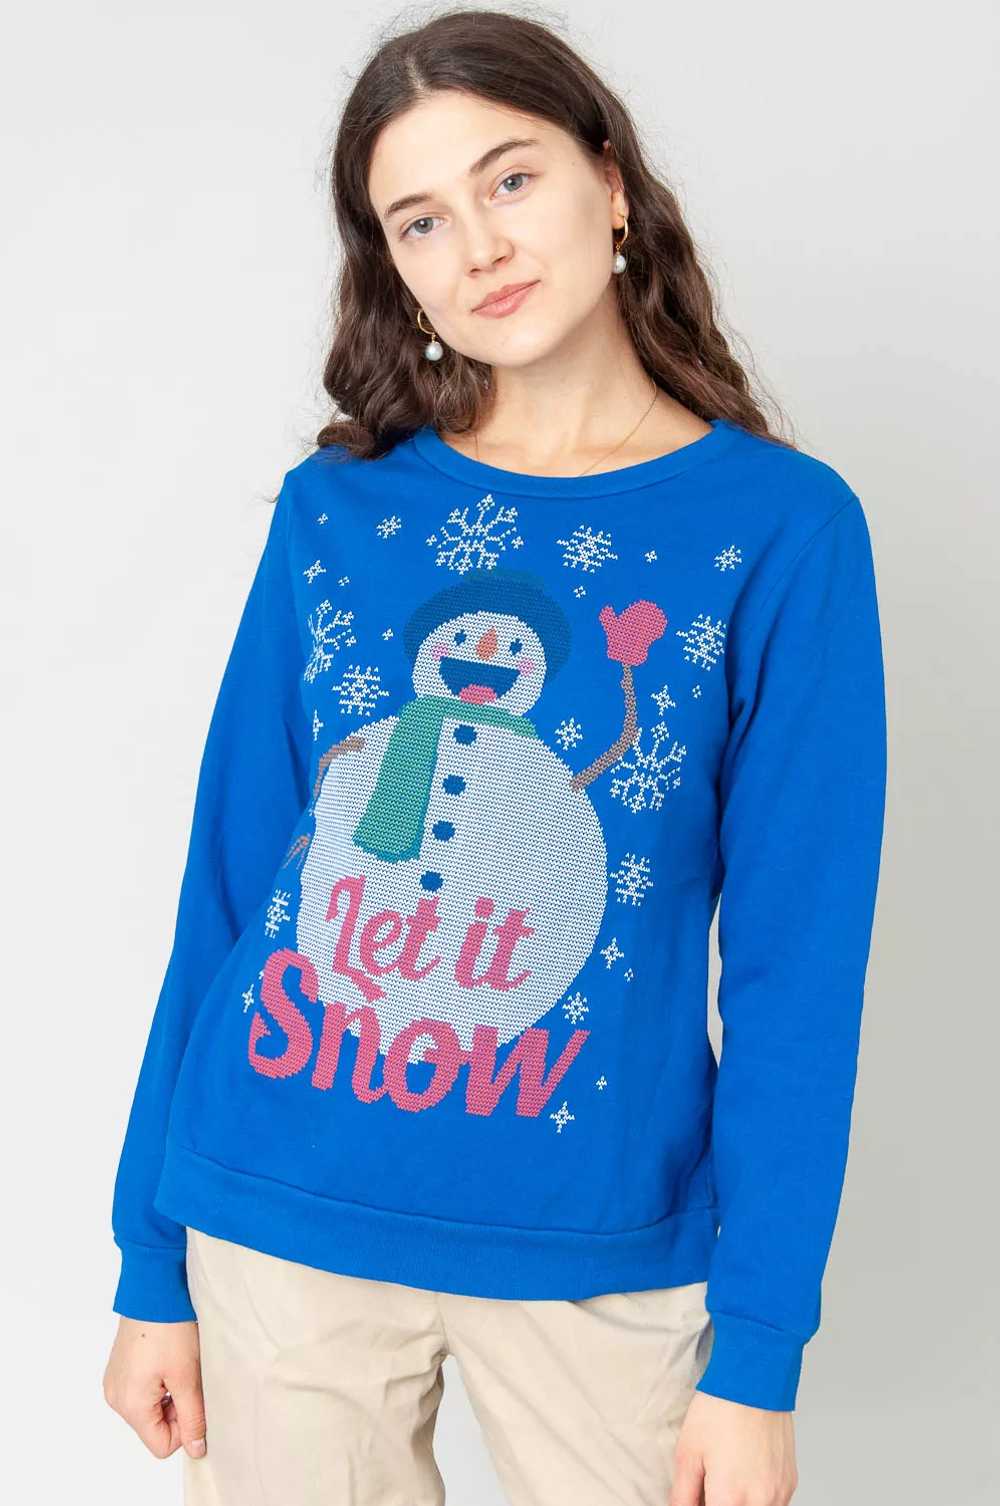 Let It Snow Christmas Sweater Blue With Snowman M… - image 1